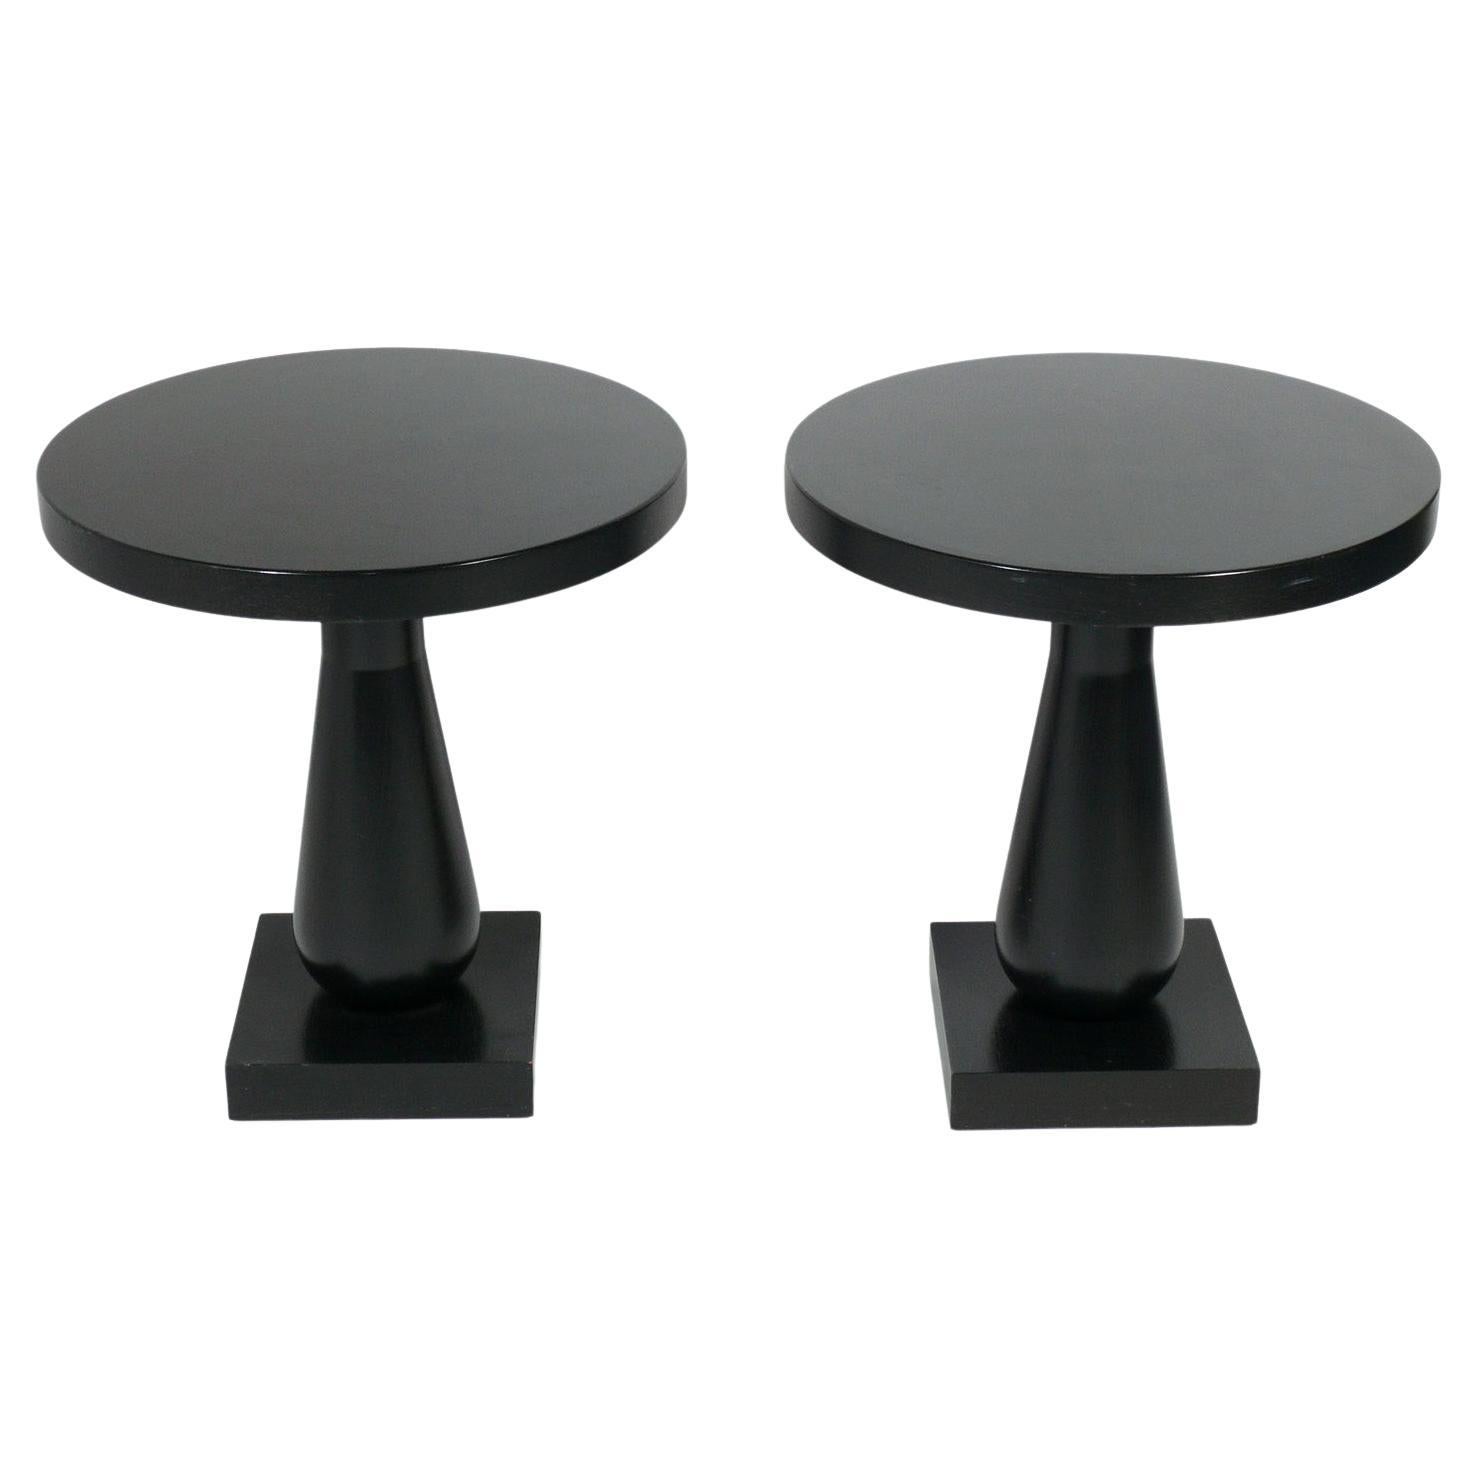 Selection of Christian Liaigre Tables 